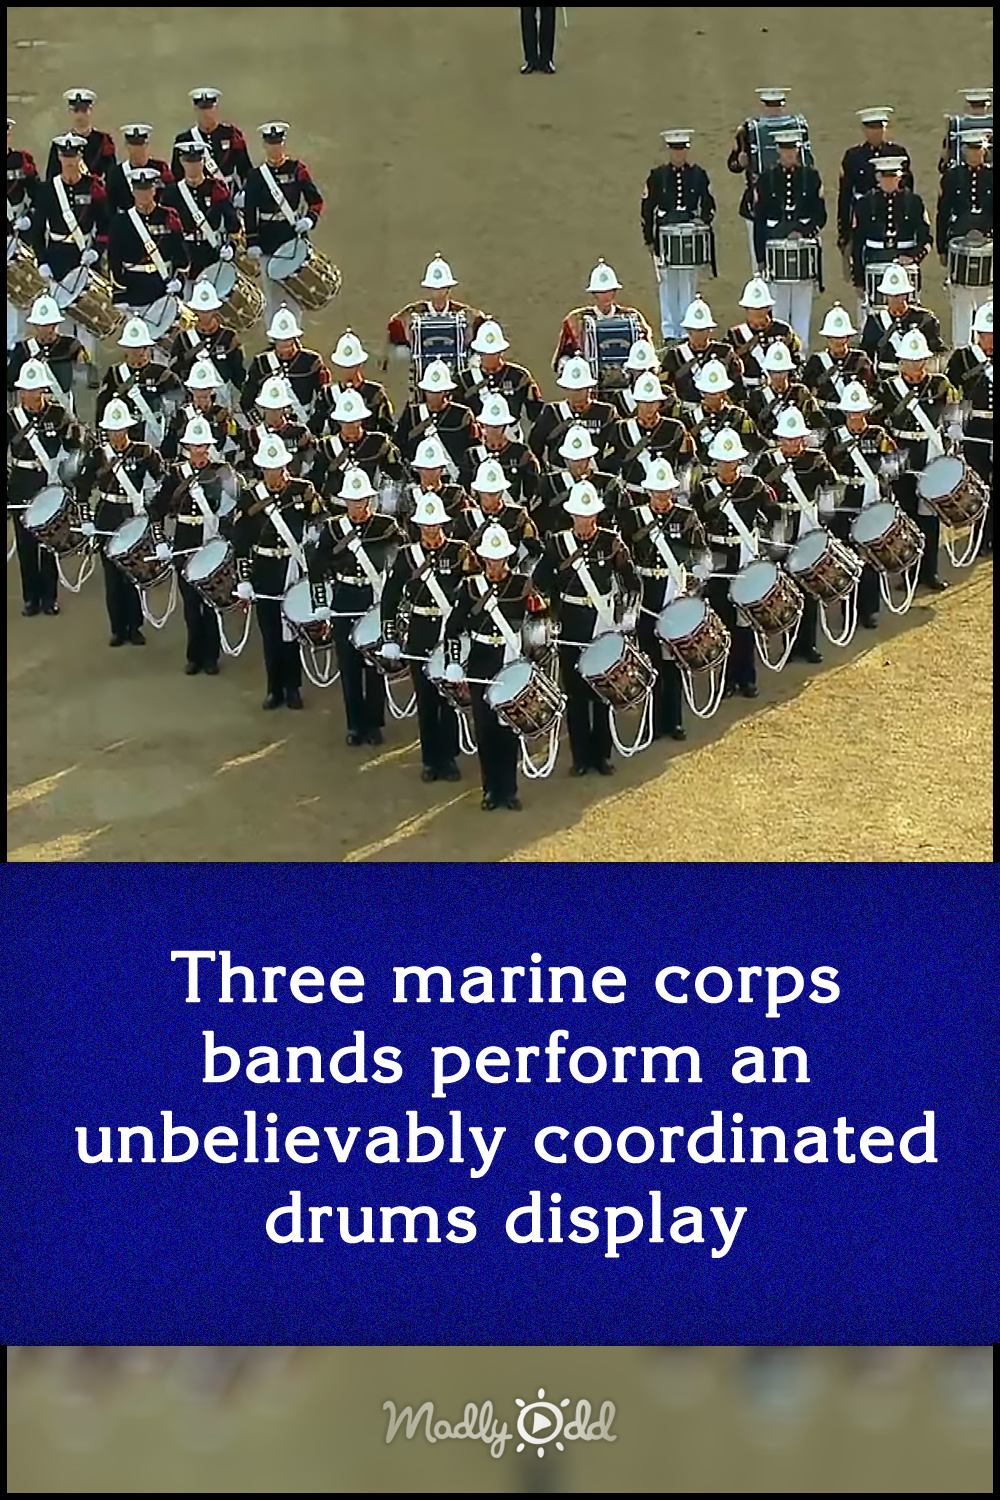 Three marine corps bands perform an unbelievably coordinated drums display